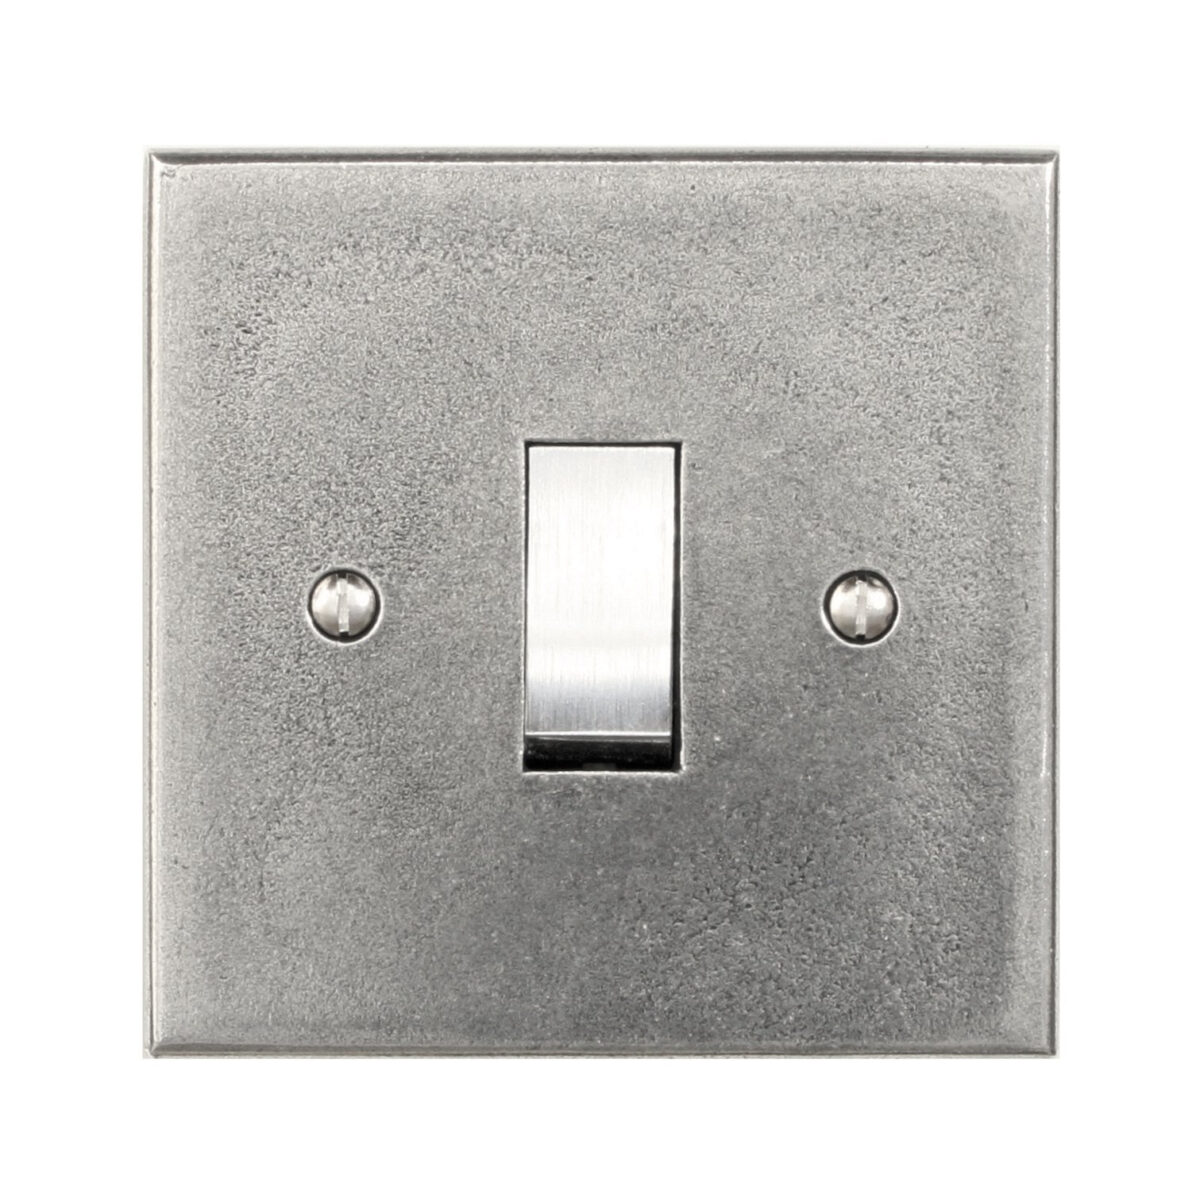 1 Gang Switch Plate - Pewter - FD600